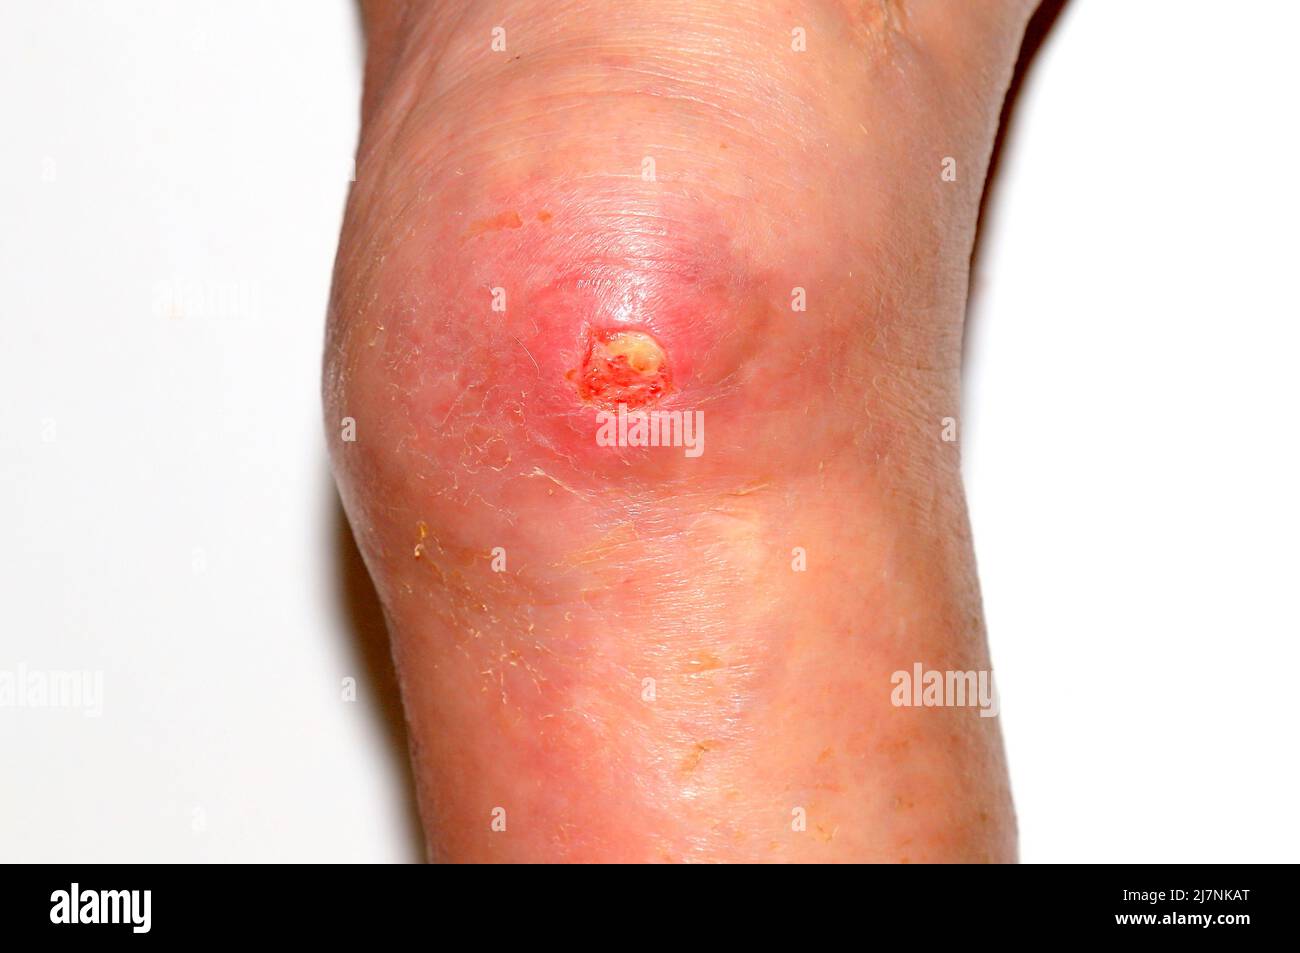 Deep large trophic ulcer on leg, defect of skin and soft tissues.  Complications of varicose veins of lower leg, weeping trophic wound,  eczema, dermati Stock Photo - Alamy